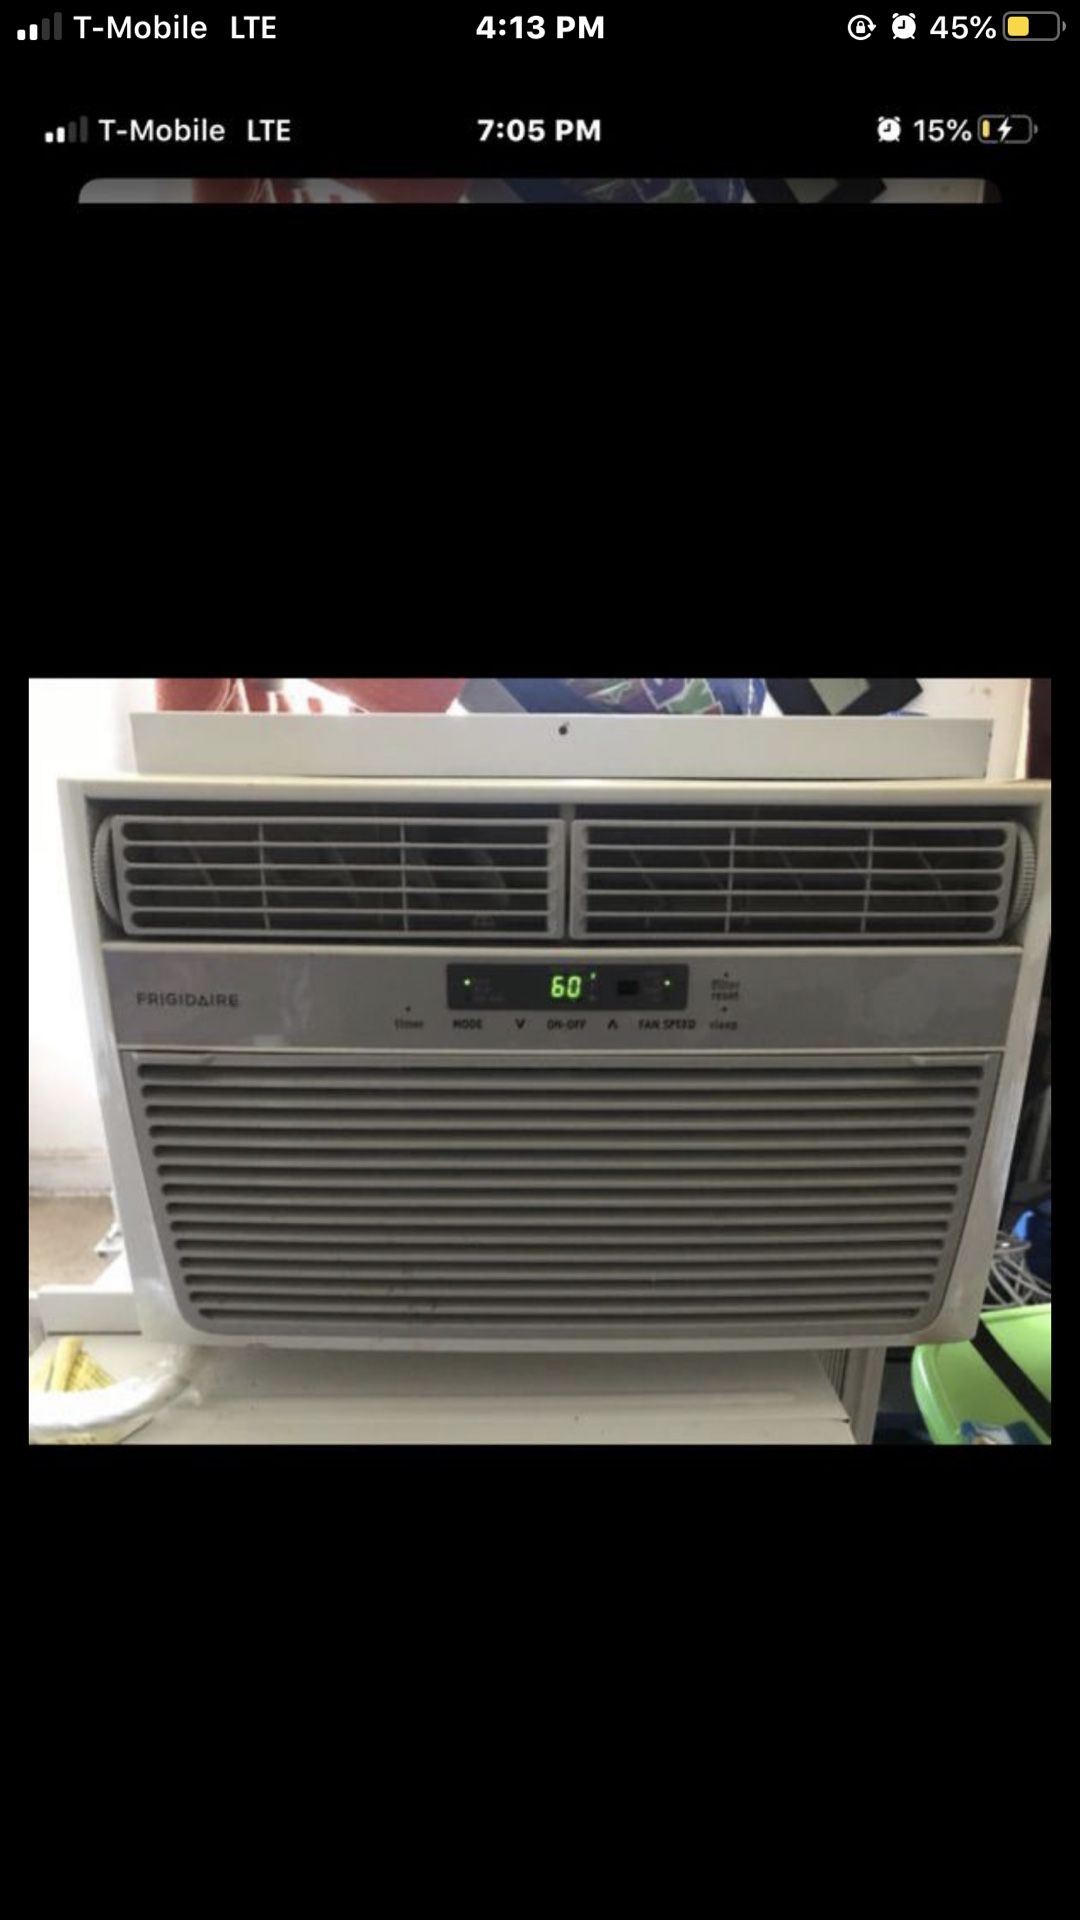 6000 BTU air conditioner blow very cold air